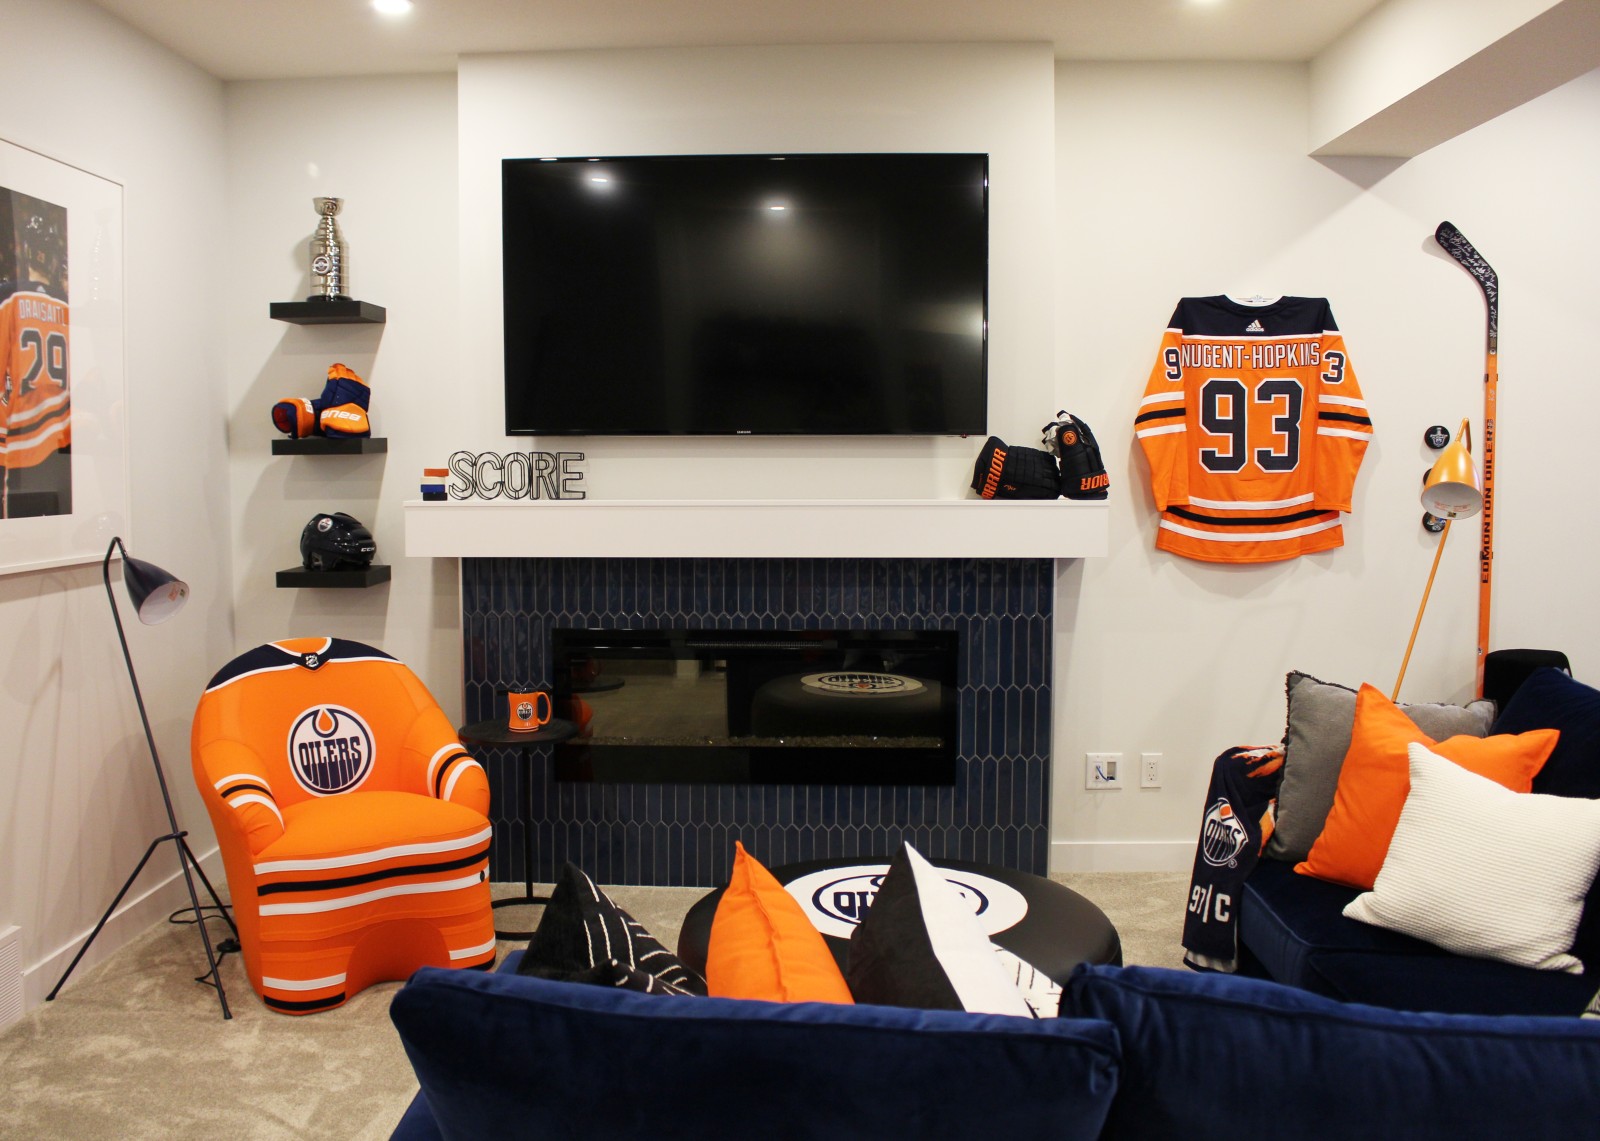 Oilers Fan Cave living room with blue accent tile on fireplace to match blue sectional couch, orange jersey chair, and hockey accessories